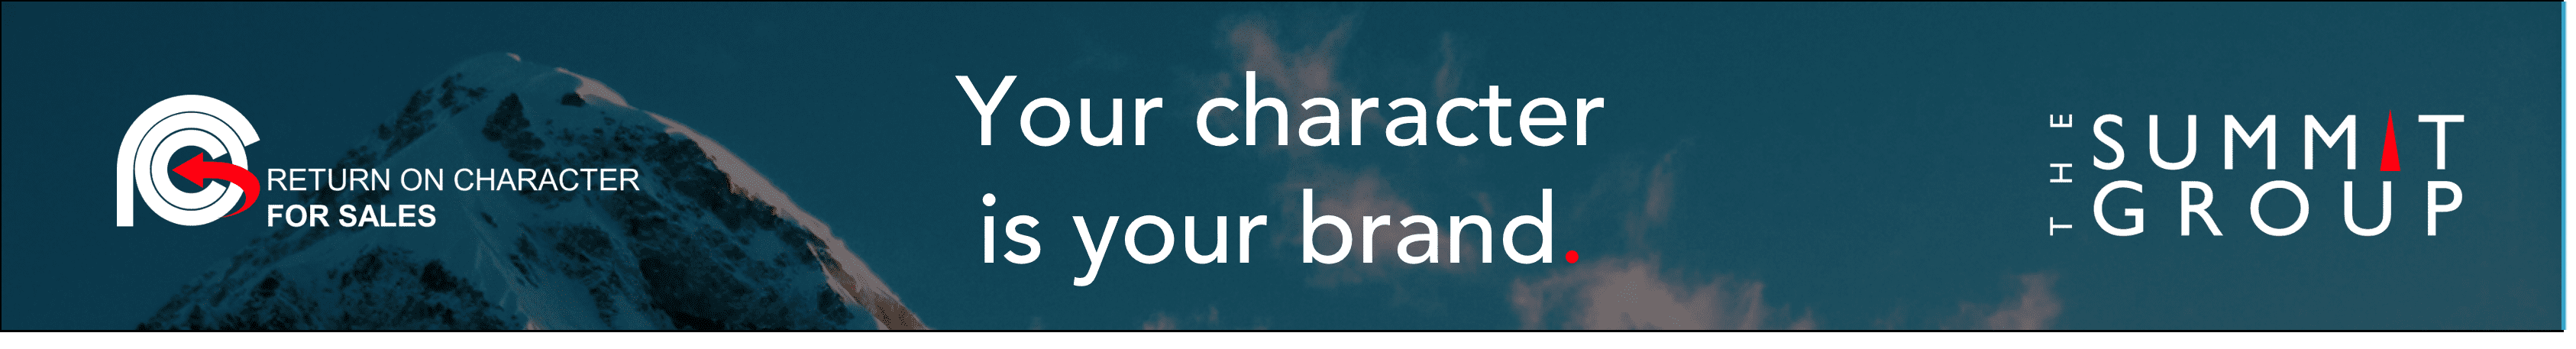 Summit Group - Your Character Is Your Brand